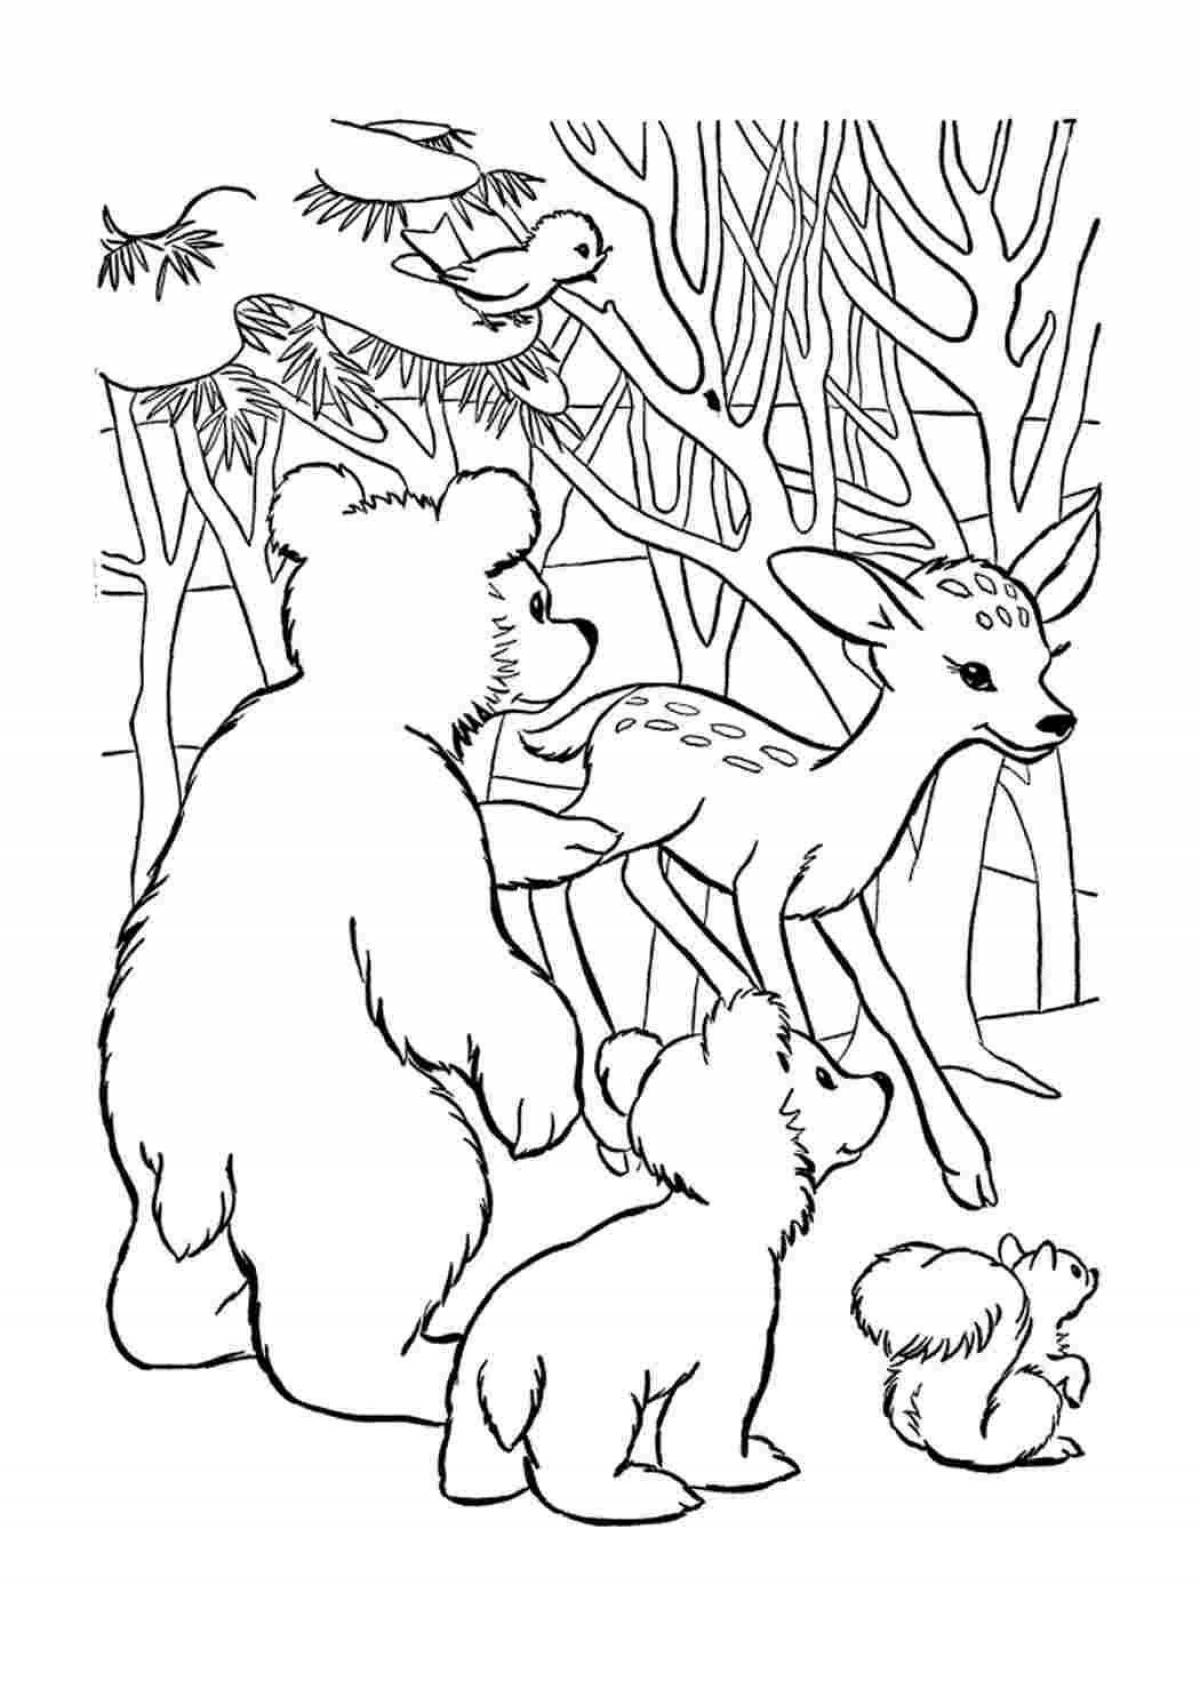 Fancy forest animal coloring for preschoolers